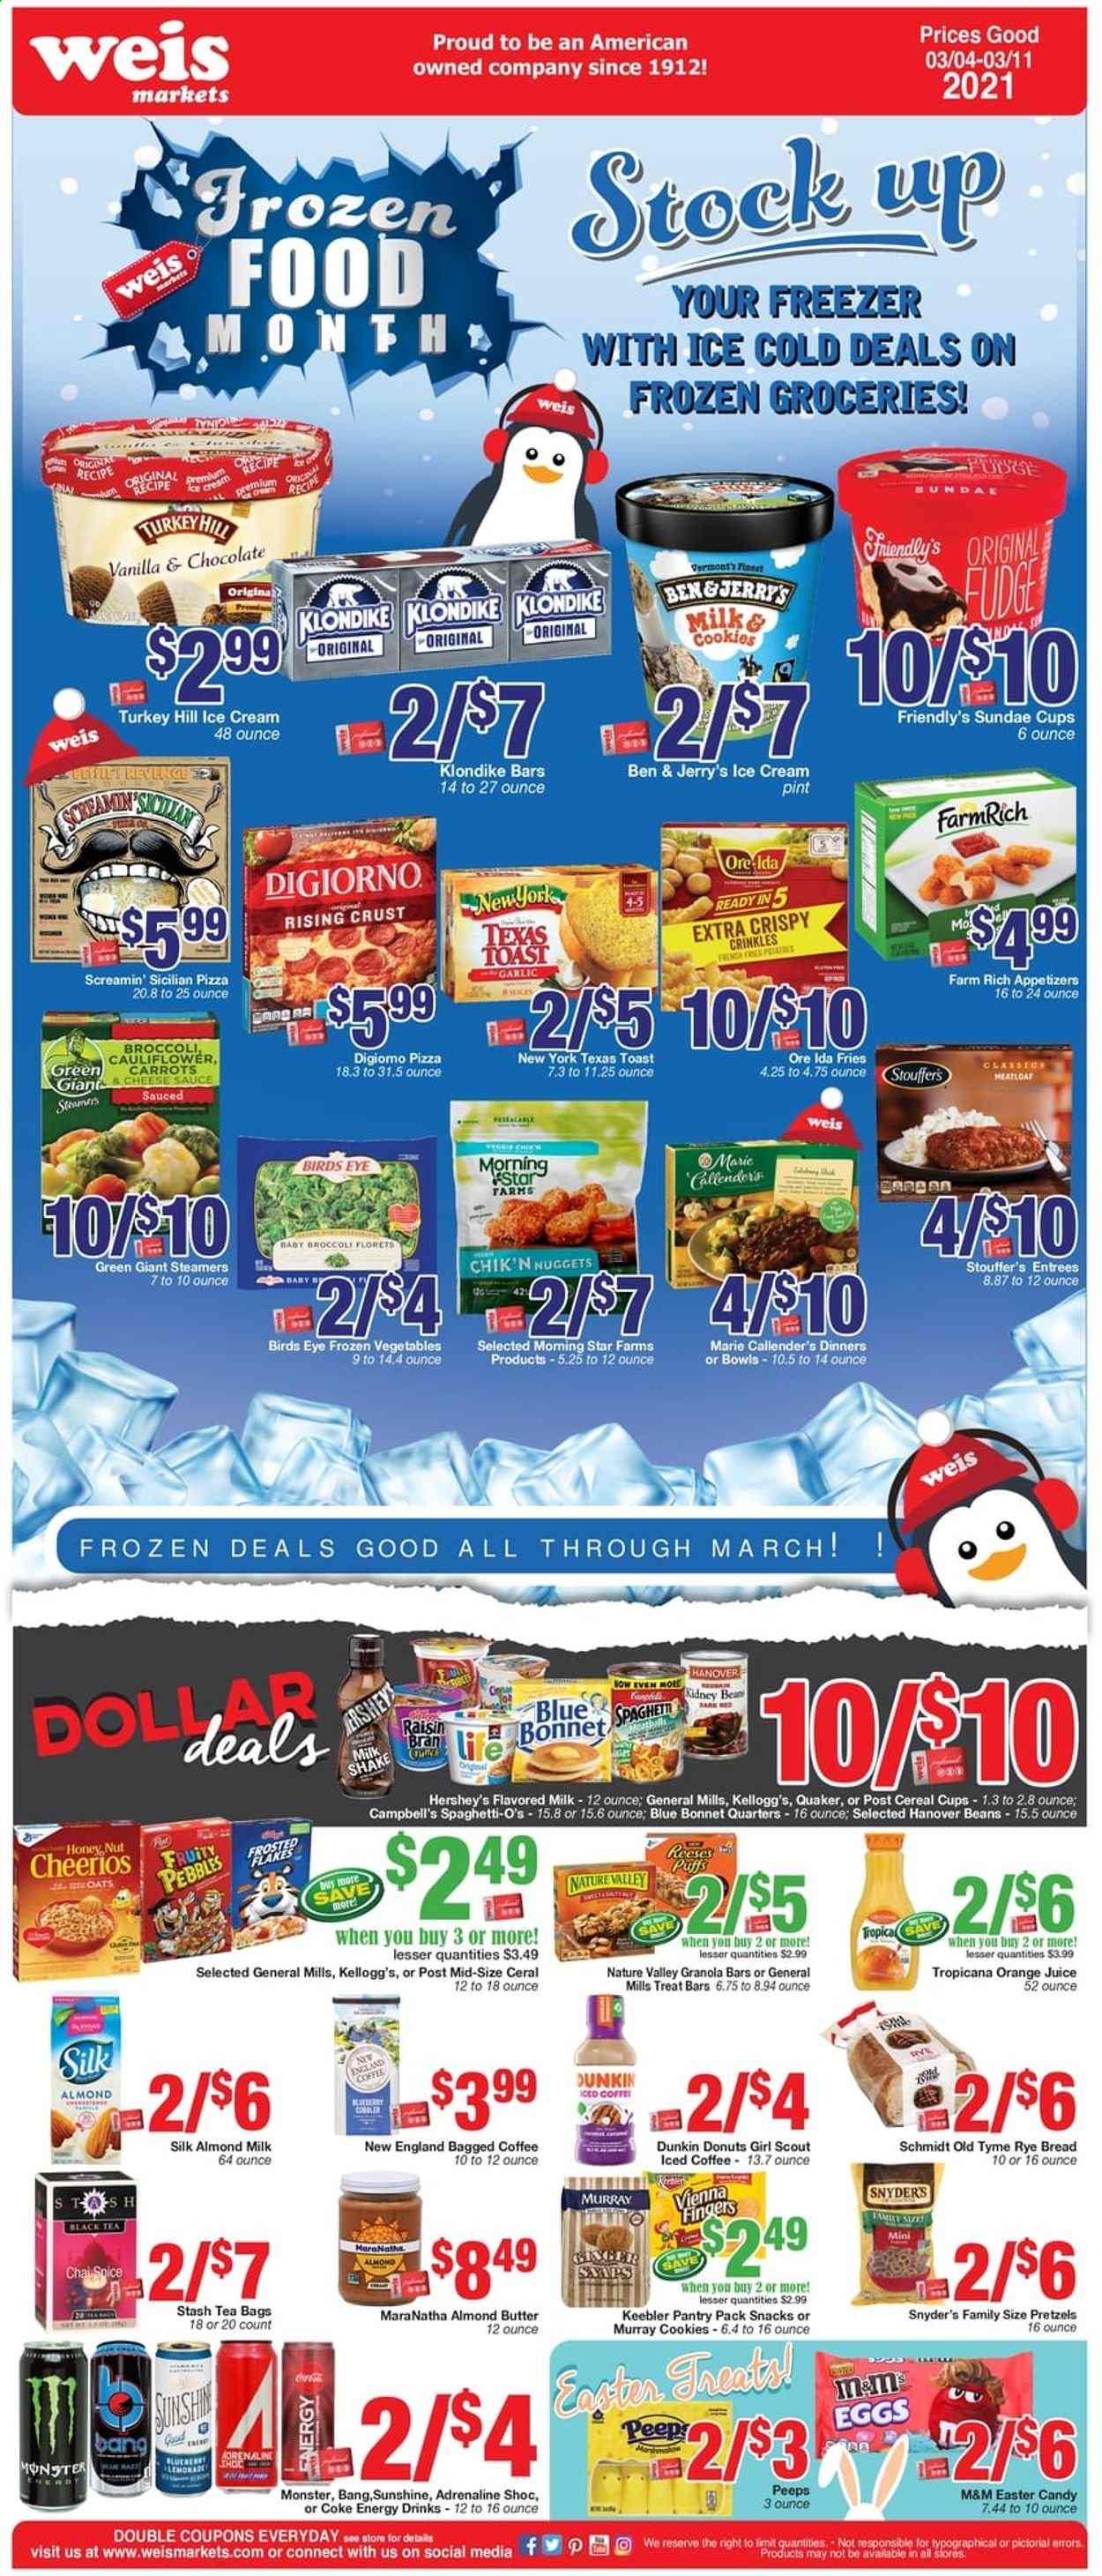 thumbnail - Weis Flyer - 03/04/2021 - 03/11/2021 - Sales products - bread, pretzels, toast bread, donut, nuggets, Campbell's, pizza, sauce, Bird's Eye, Quaker, Marie Callender's, almond milk, eggs, almond butter, Sunshine, ice cream, Reese's, Hershey's, Ben & Jerry's, Friendly's Ice Cream, beans, carrots, cauliflower, frozen vegetables, Stouffer's, potato fries, Ore-Ida, Screamin' Sicilian, cookies, vienna fingers, chocolate, M&M's, Kellogg's, Keebler, Peeps, snack, oats, cereals, Cheerios, granola bar, Raisin Bran, Nature Valley, spaghetti, Coca-Cola, lemonade, orange juice, juice, energy drink, Monster, iced coffee, tea bags, bagged coffee. Page 4.